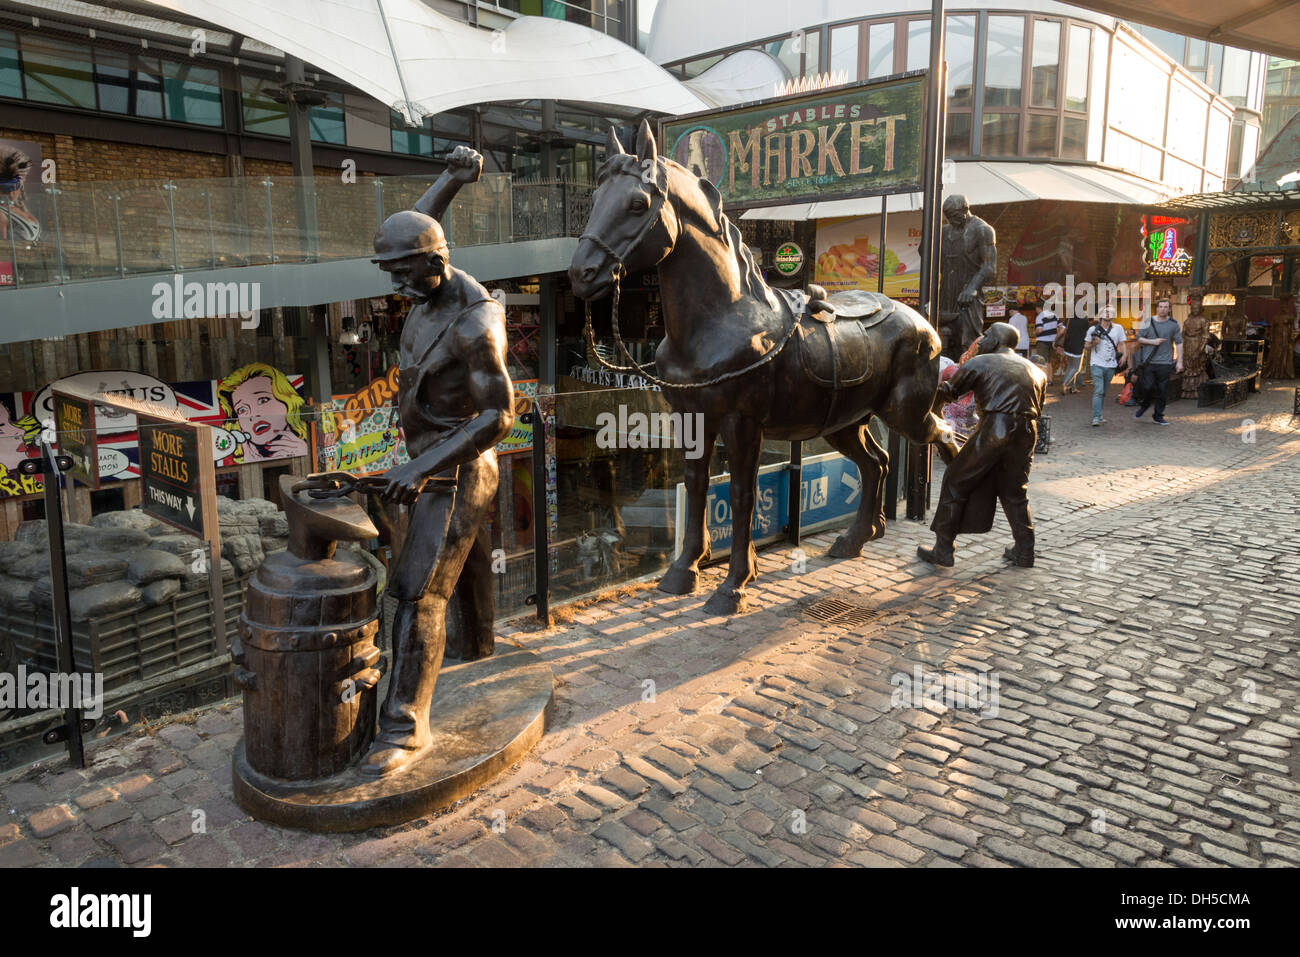 The Stables Market in Camden Town, London, England, UK Stock Photo